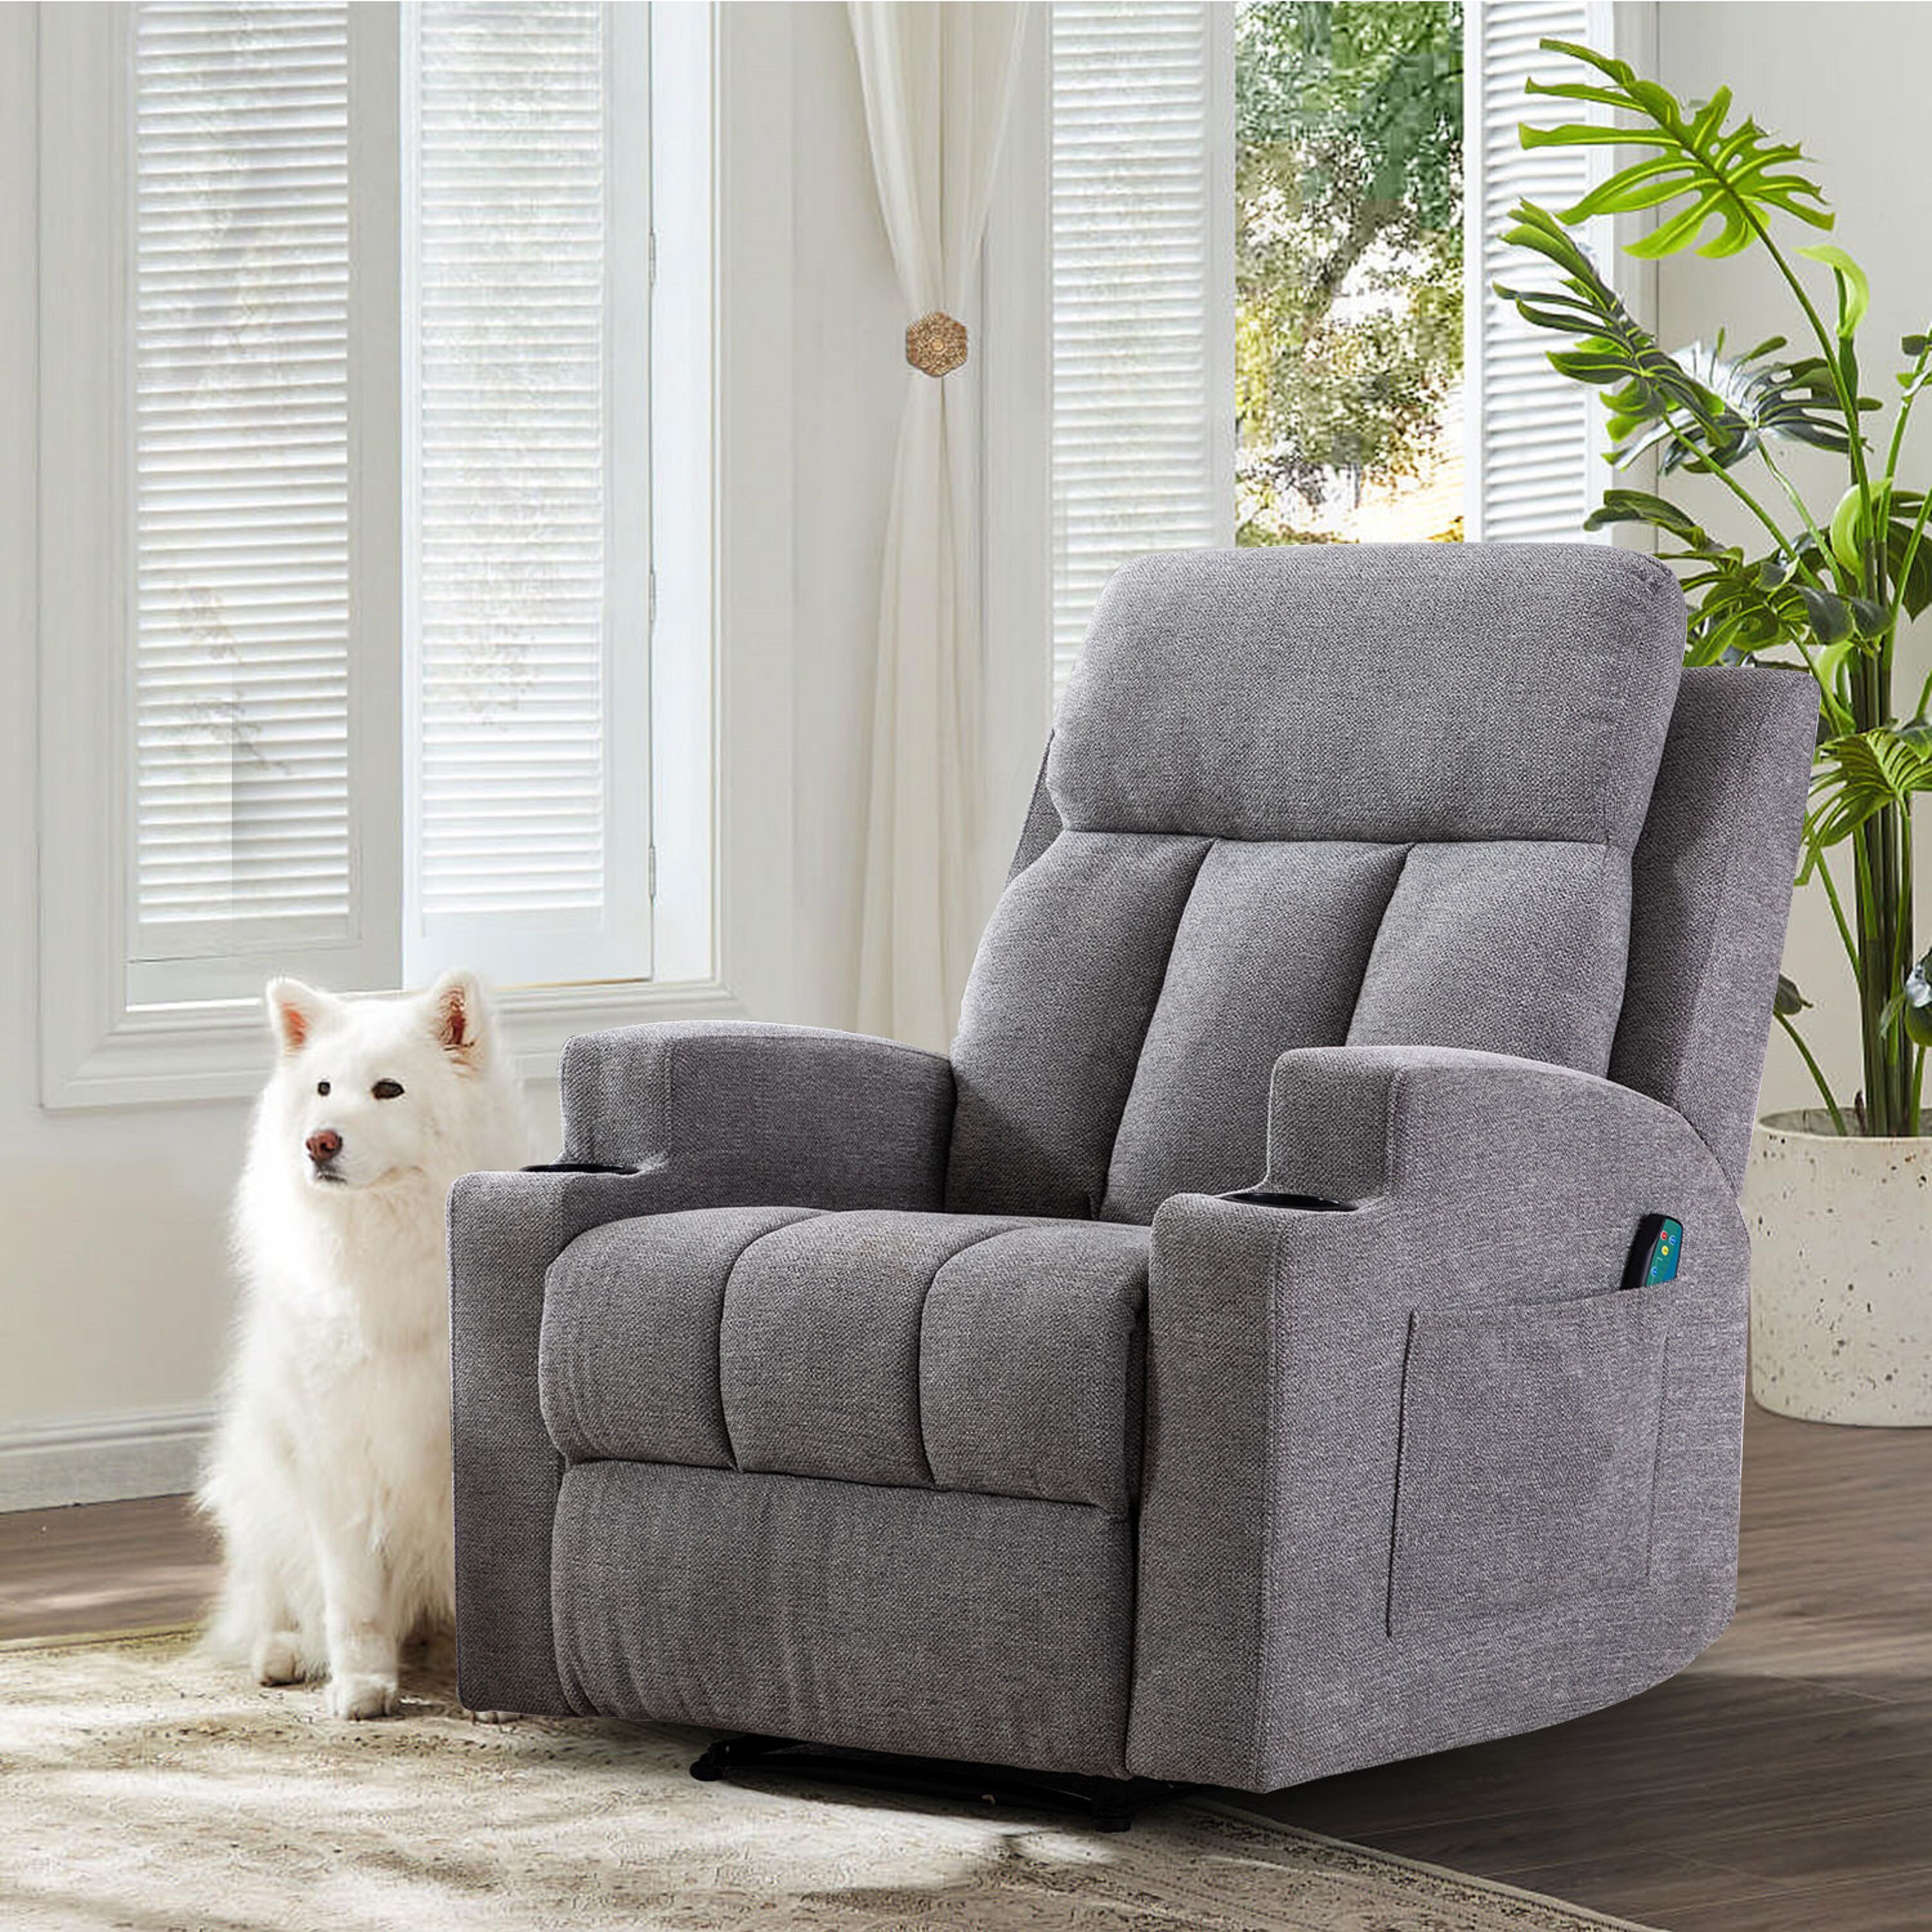 Myria Upholstered Manual Recliner Chair Furry Friend Friendly Fabric Massage Heating and Cup Holder Red Barrel Studio Upholstery Color: Gray